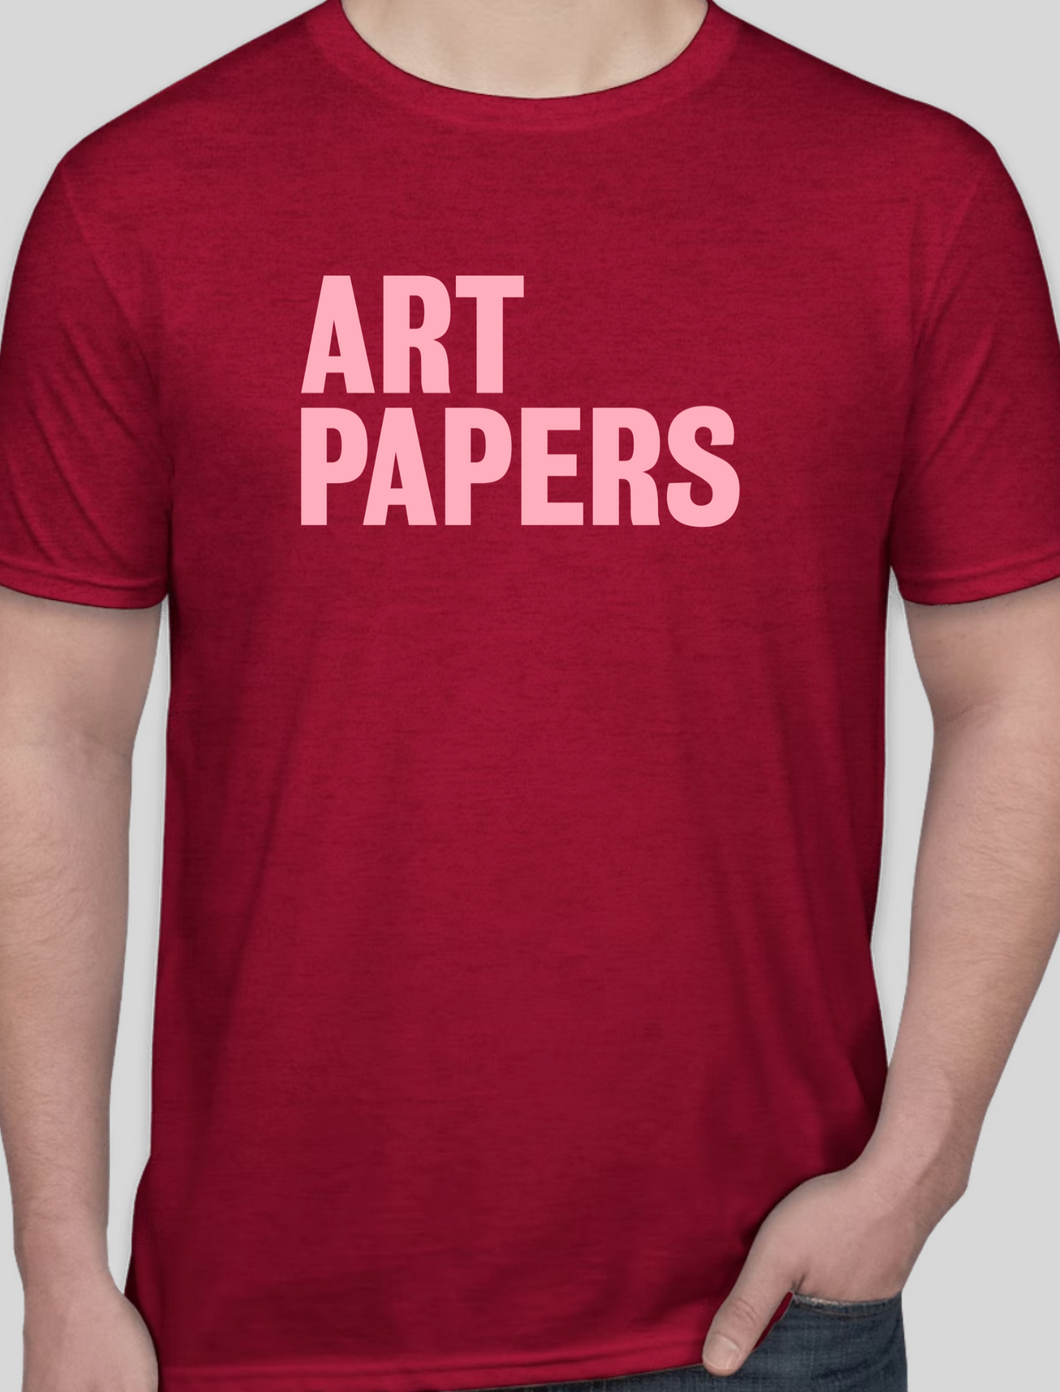 ART PAPERS T-Shirt - RED